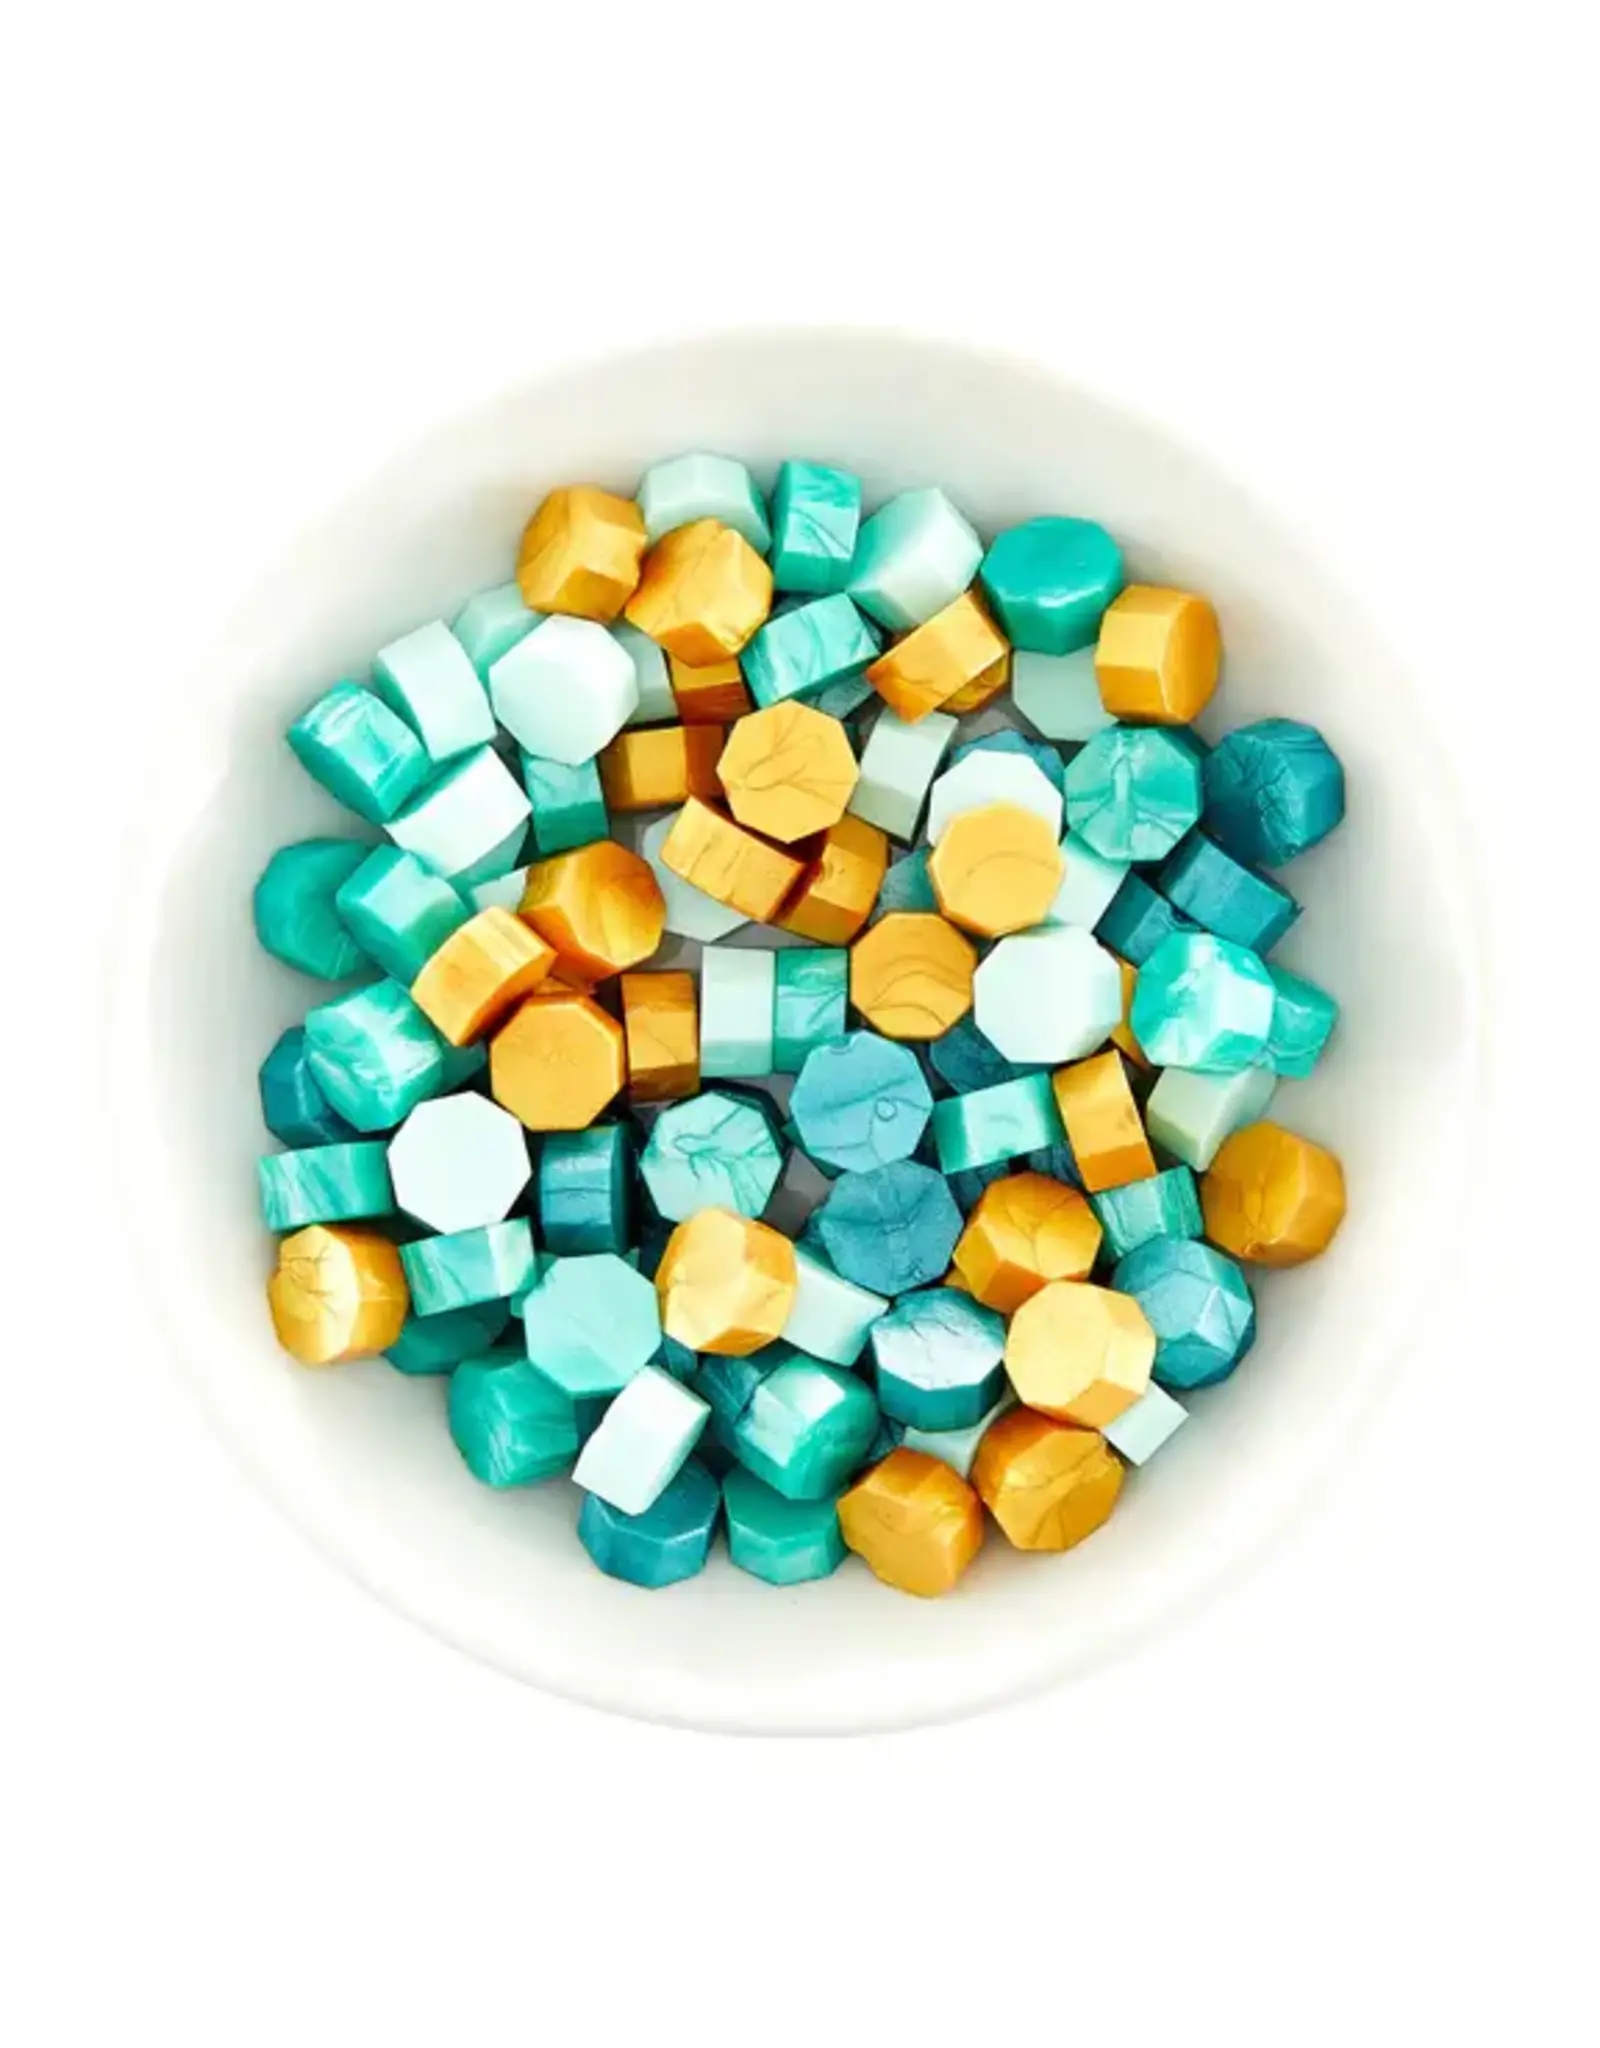 SPELLBINDERS SPELLBINDERS SEALED BY SPELLBINDERS COLLECTION TEAL MUST-HAVE WAX BEAD MIX 100/PK